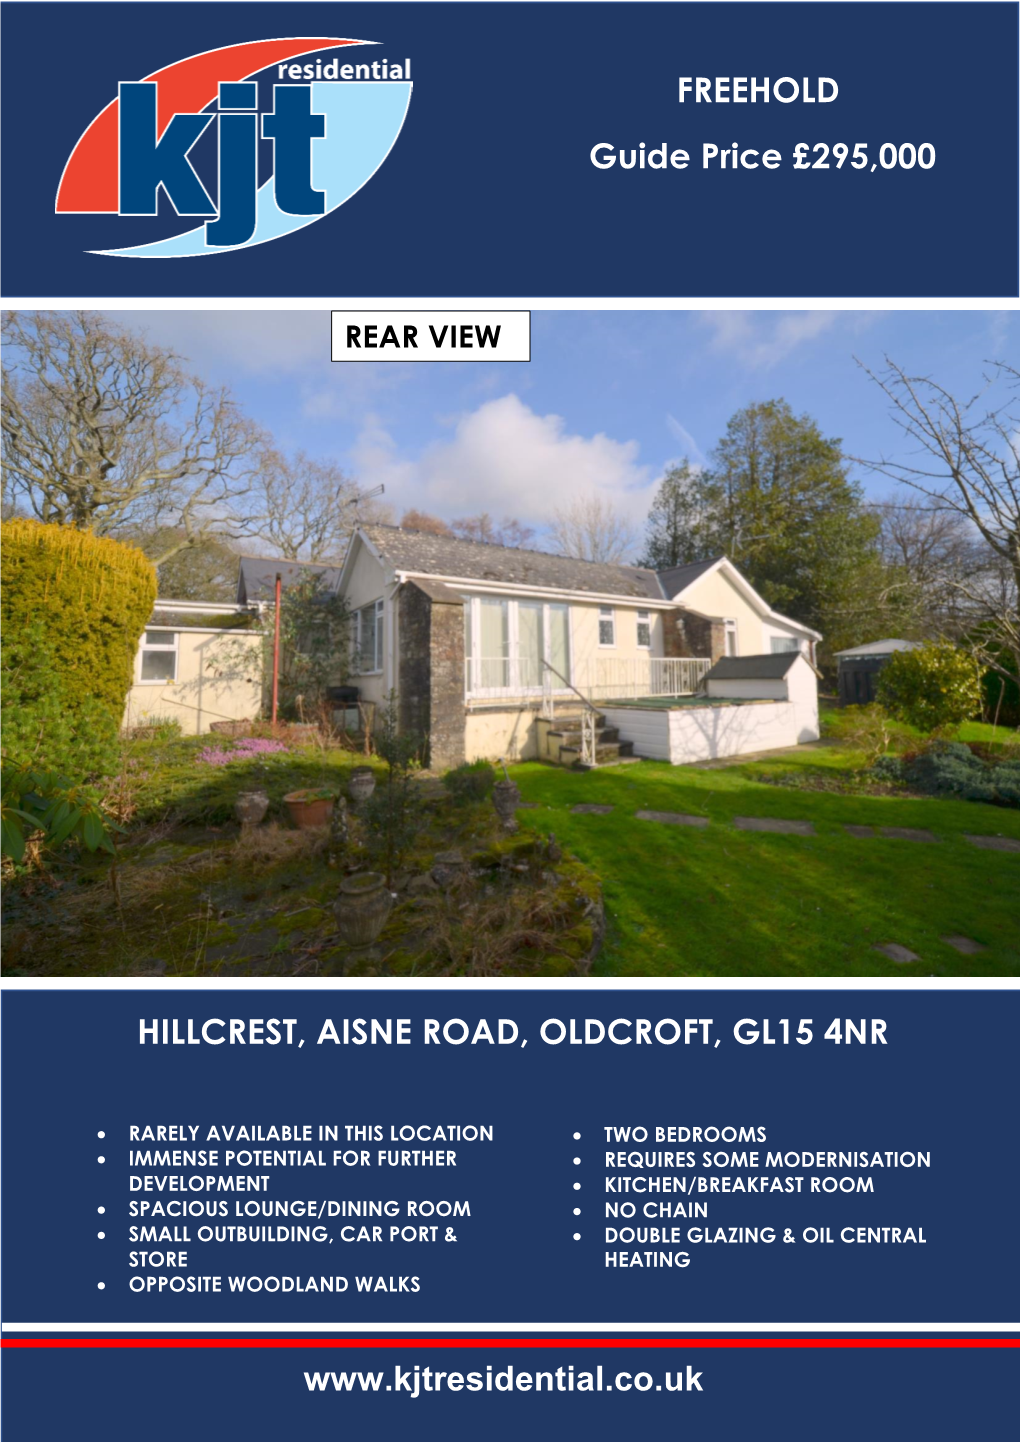 FREEHOLD Guide Price £295,000 HILLCREST, AISNE ROAD